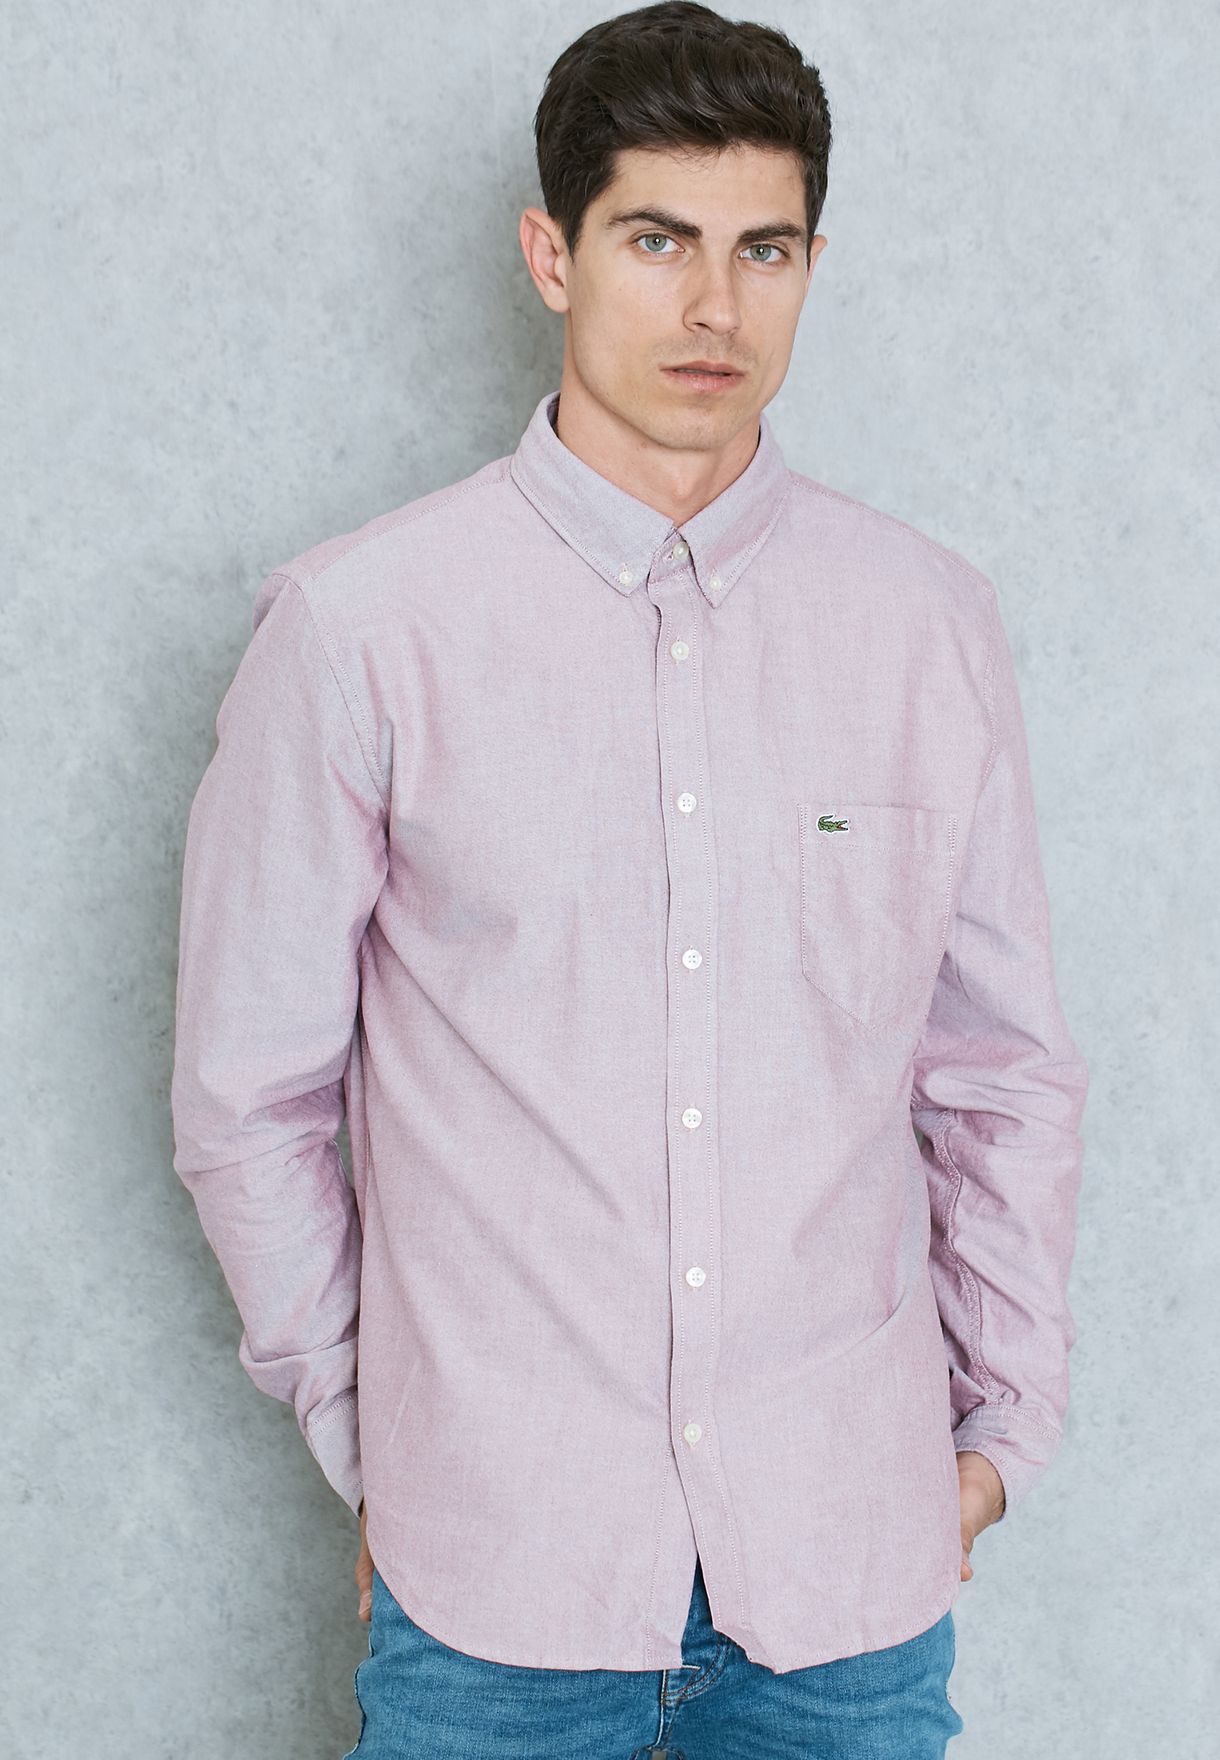 lacoste oxford shirt